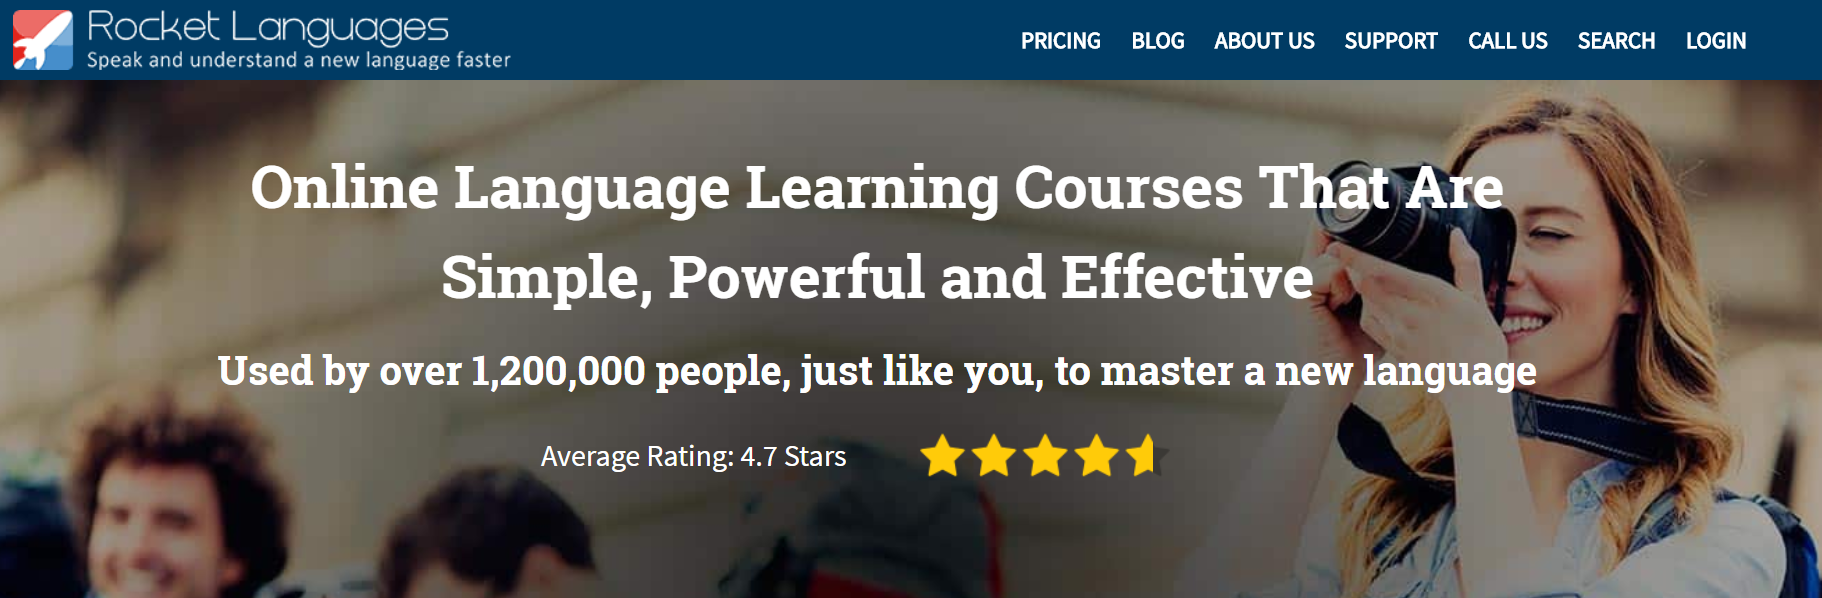 Rocket Languages Courses Coupon Codes- Speak And Understand A New Language Faster